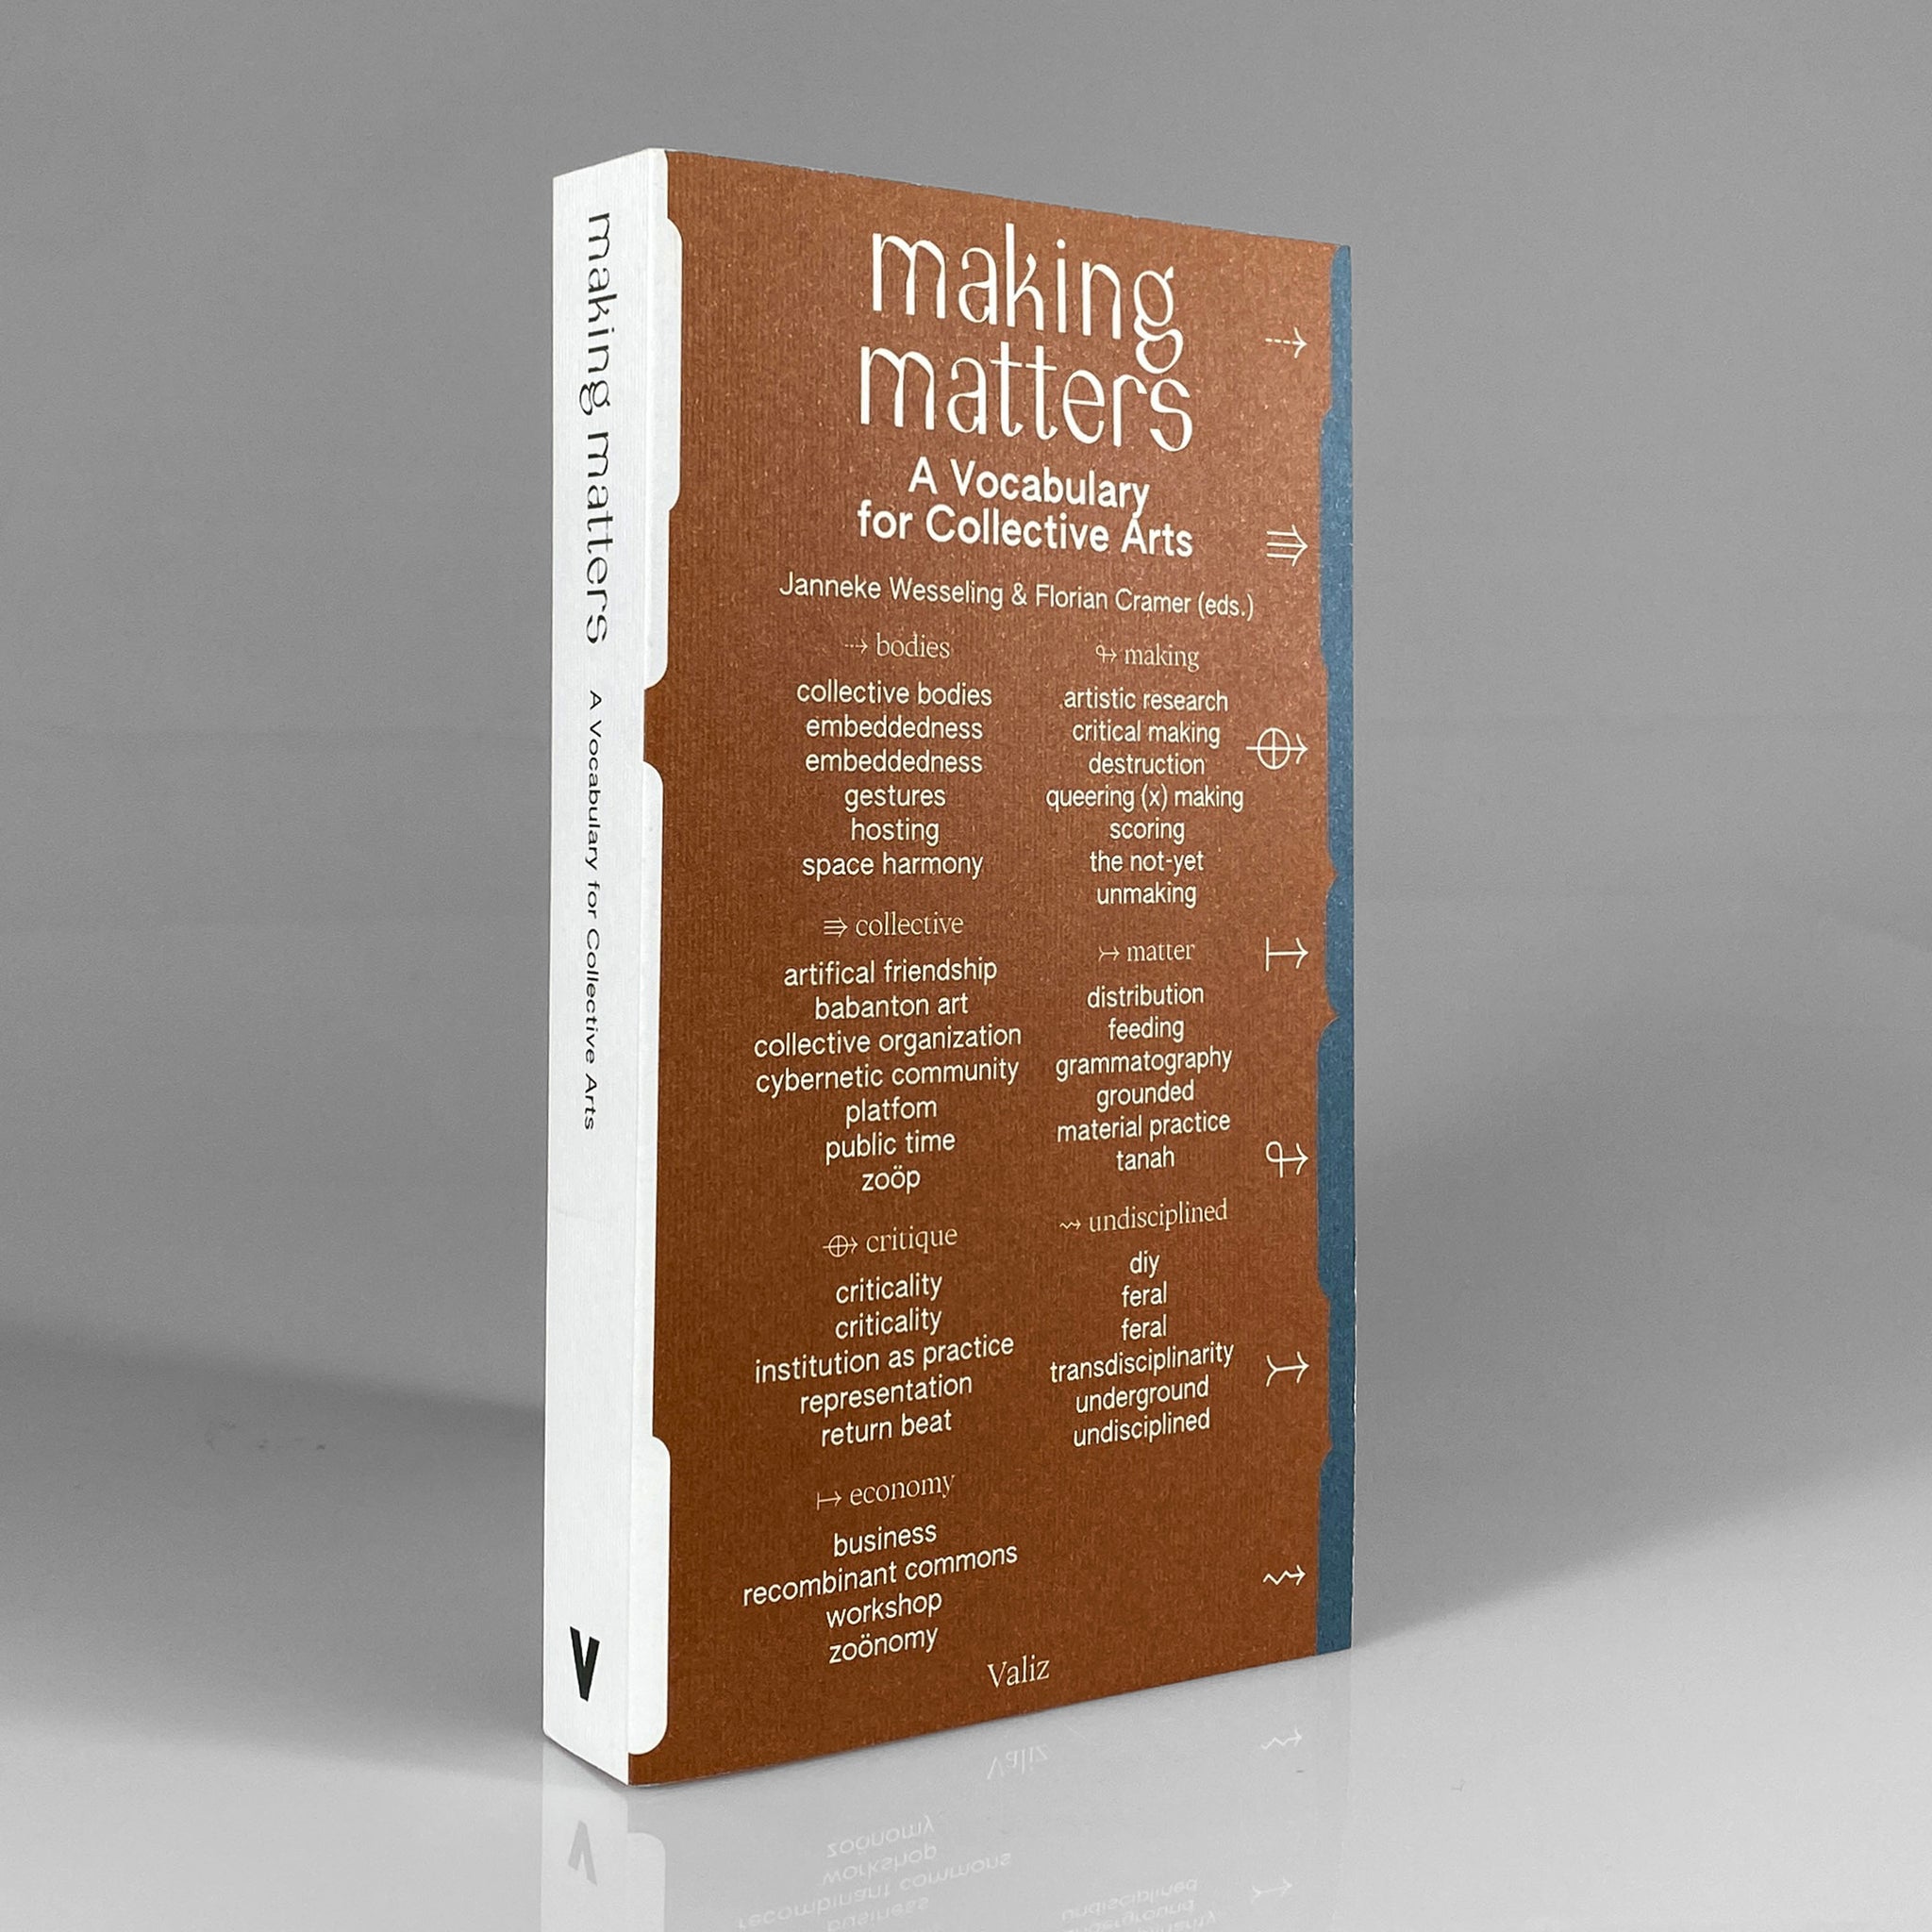 Making Matters: A Vocabulary for Collective Arts